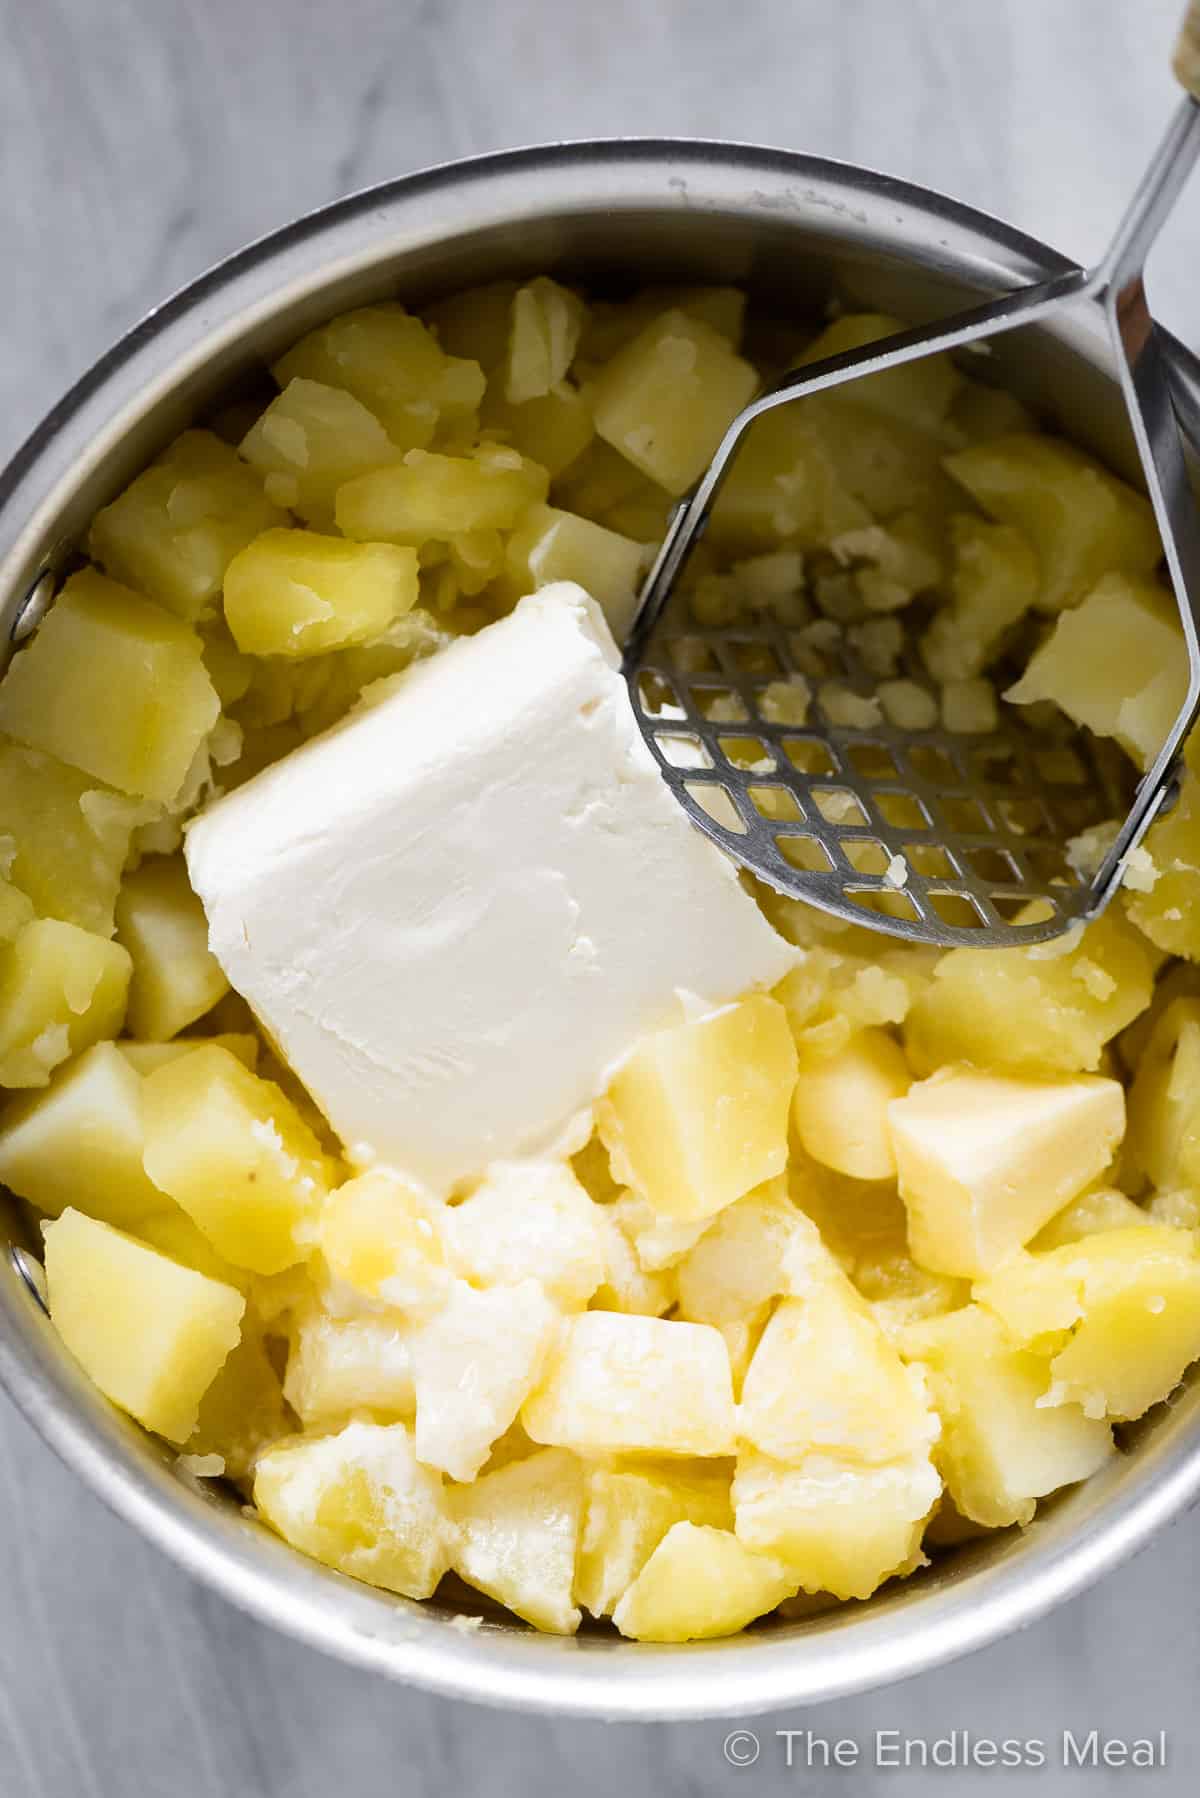 Cooked potatoes in a pot with cream cheese and a potato masher.